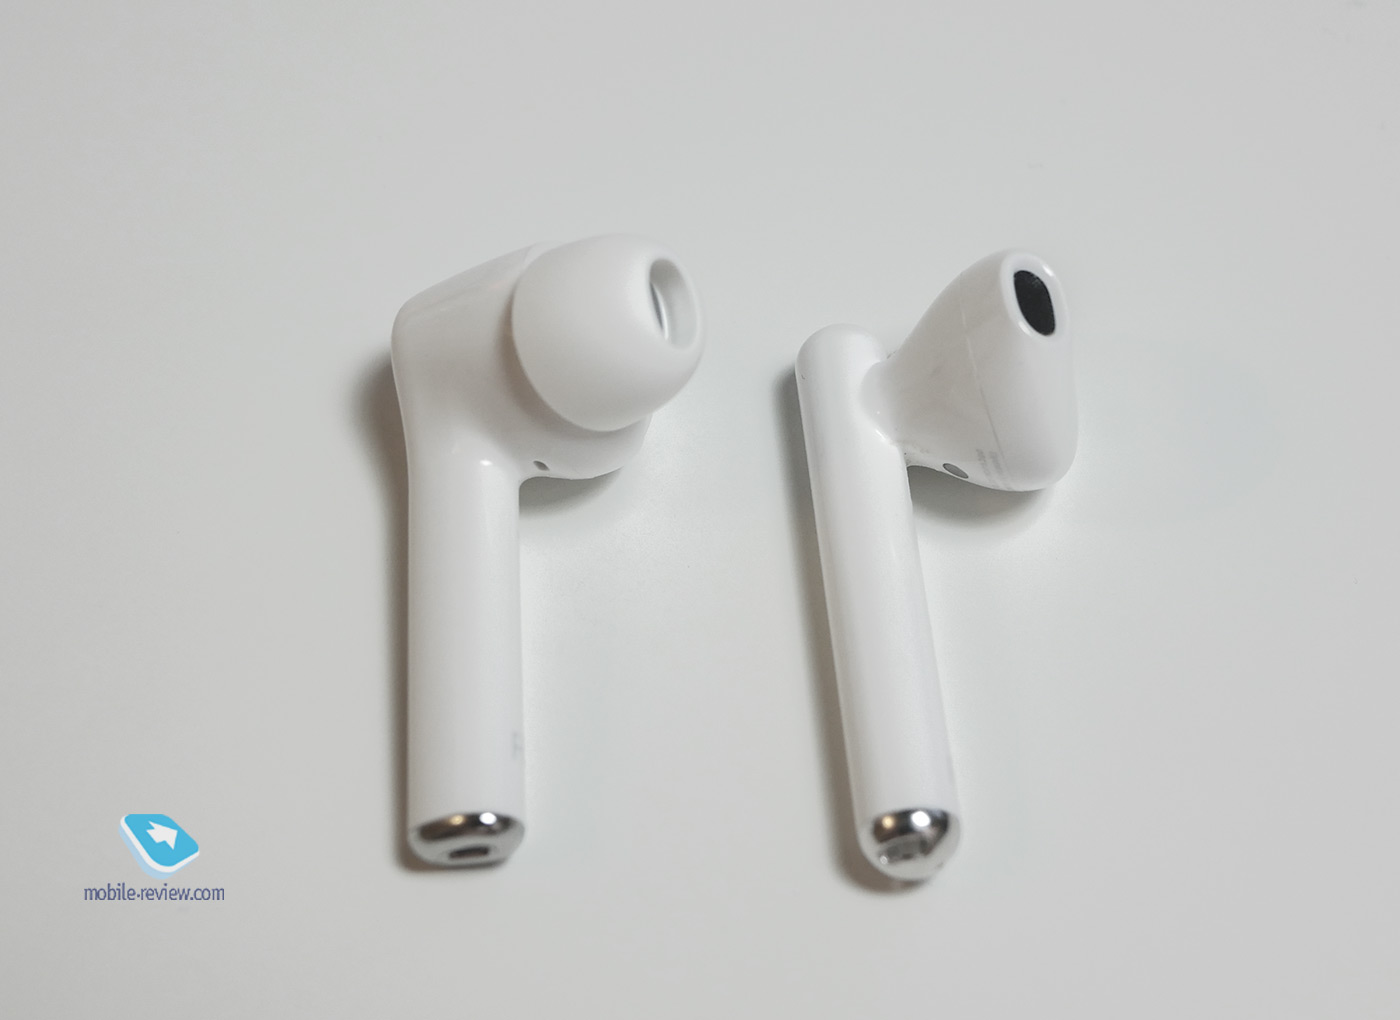 Review-comparison of Honor Magic Earbuds and Huawei Freebuds 3